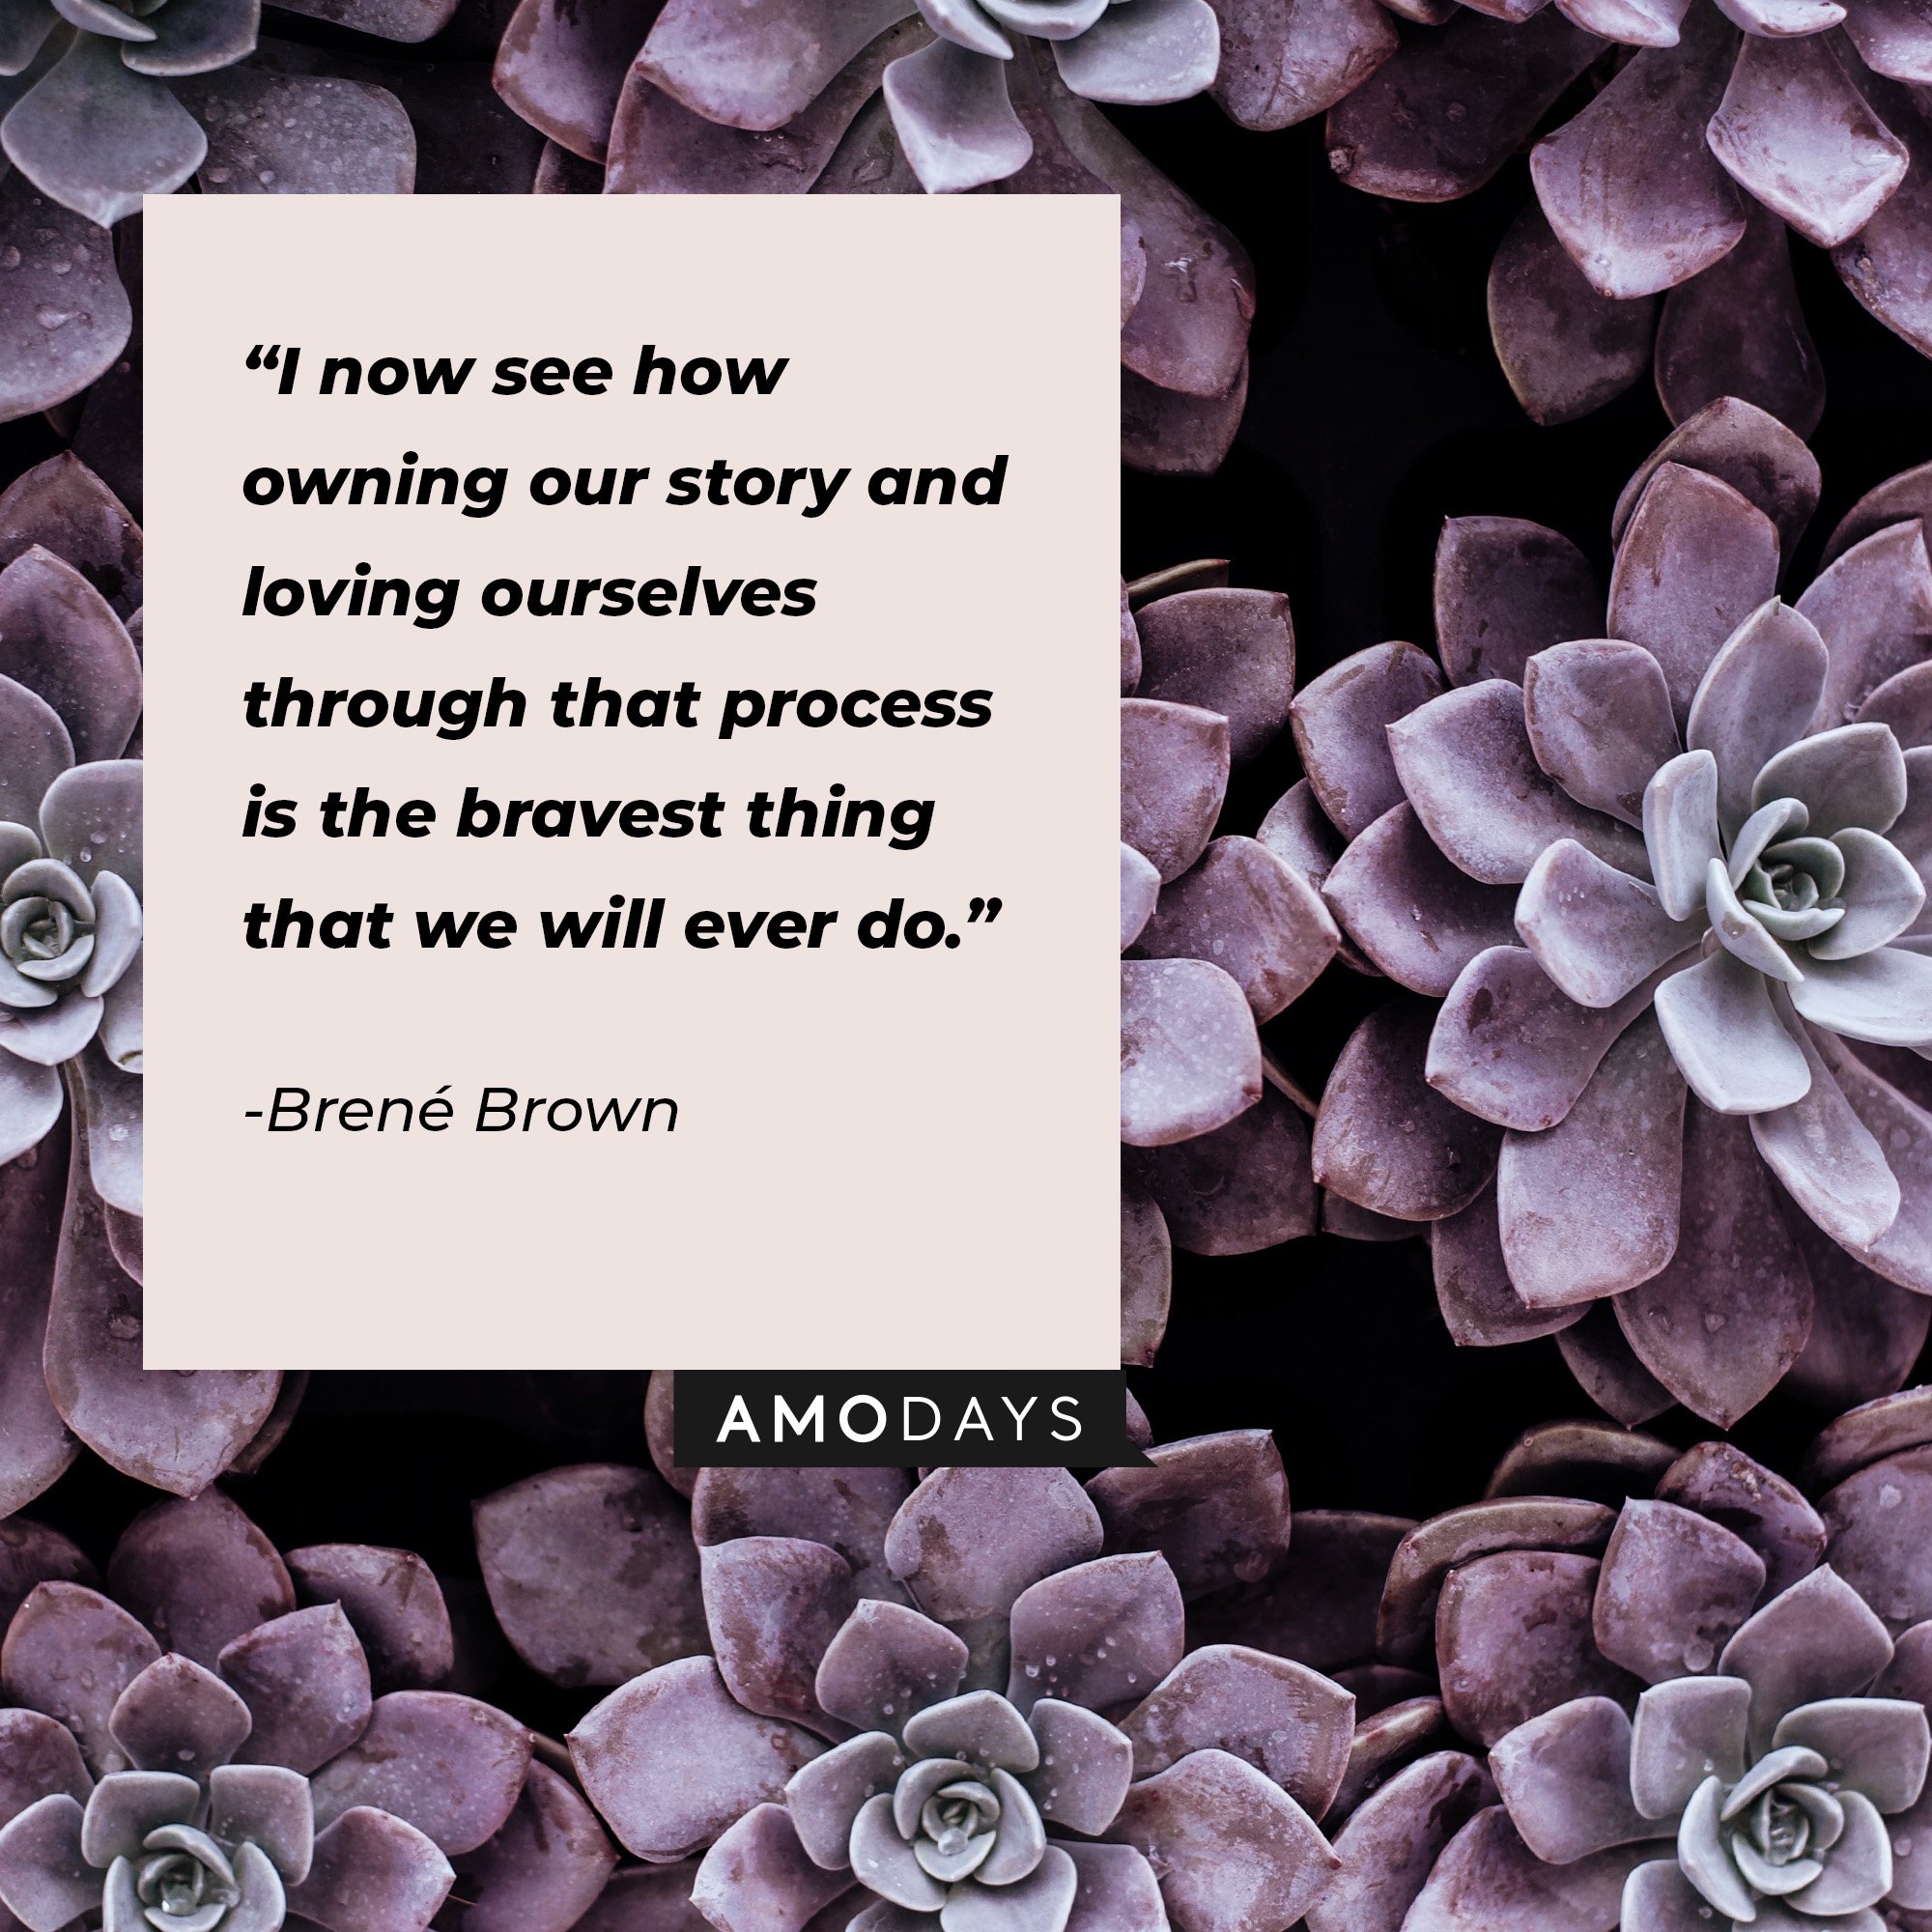  Brené Brown’s quote: “I now see how owning our story and loving ourselves through that process is the bravest thing that we will ever do.” | Image: AmoDays  